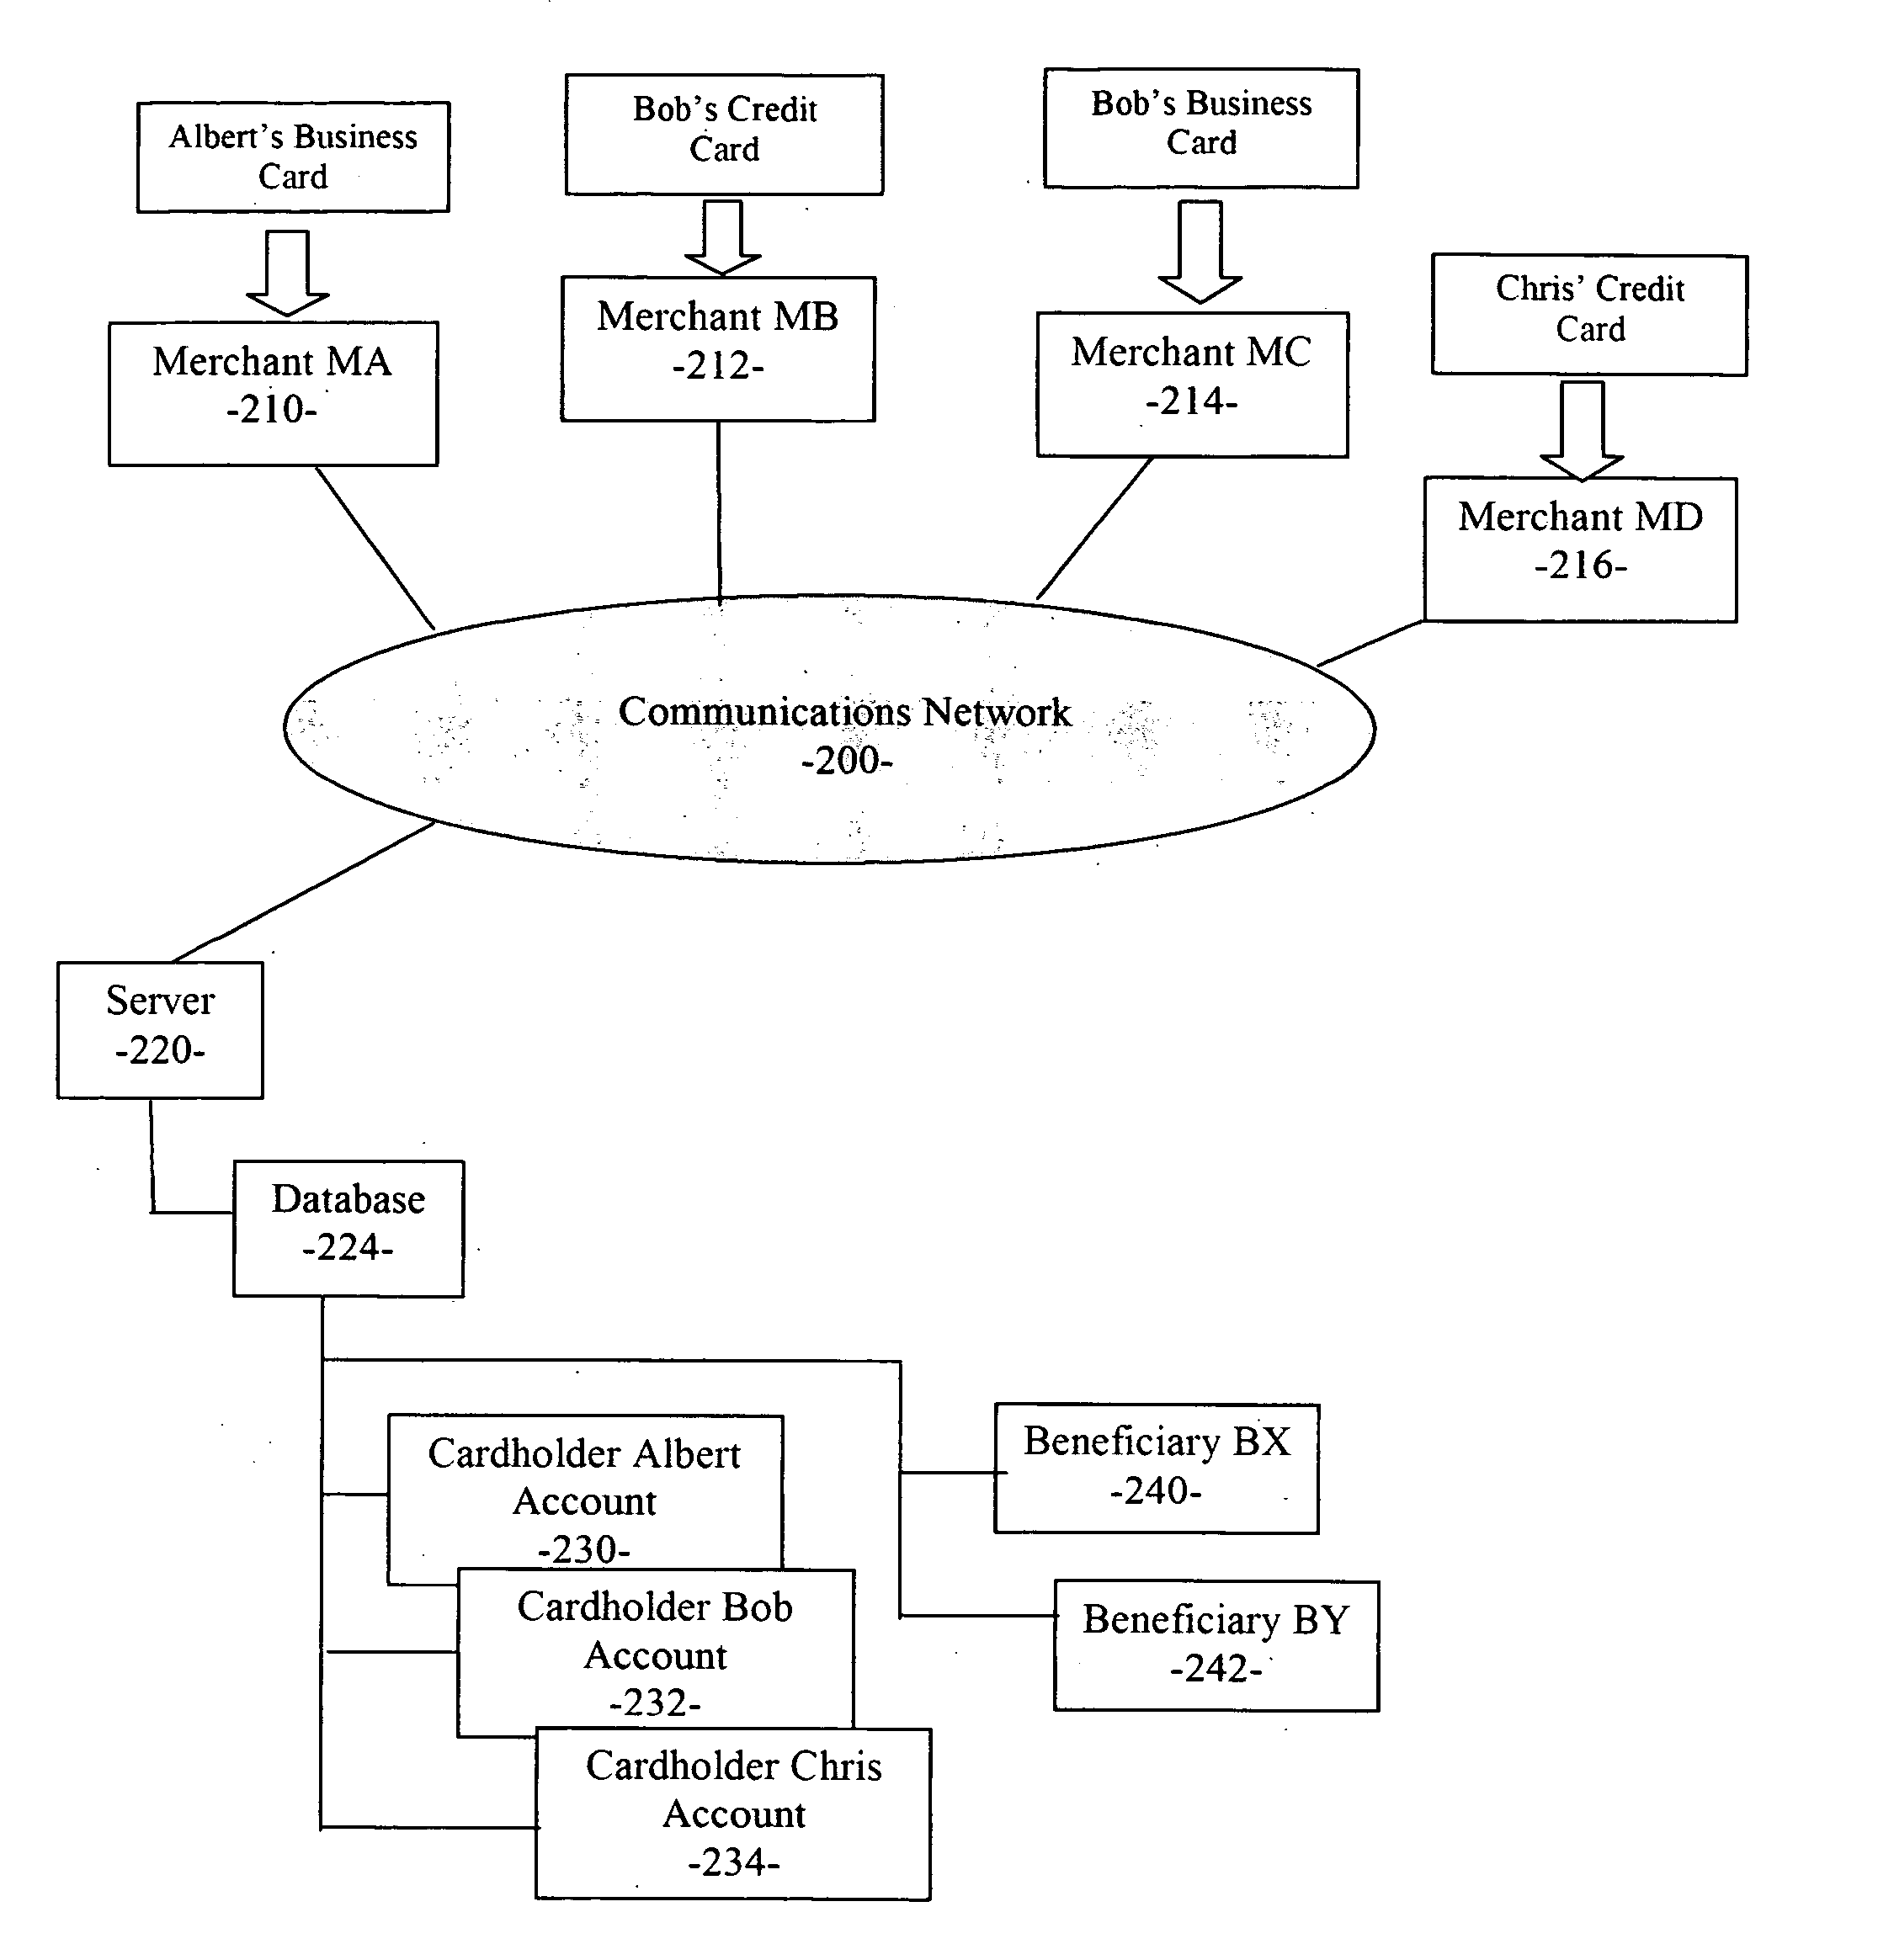 Method and system for multiple income-generating business card and referral network